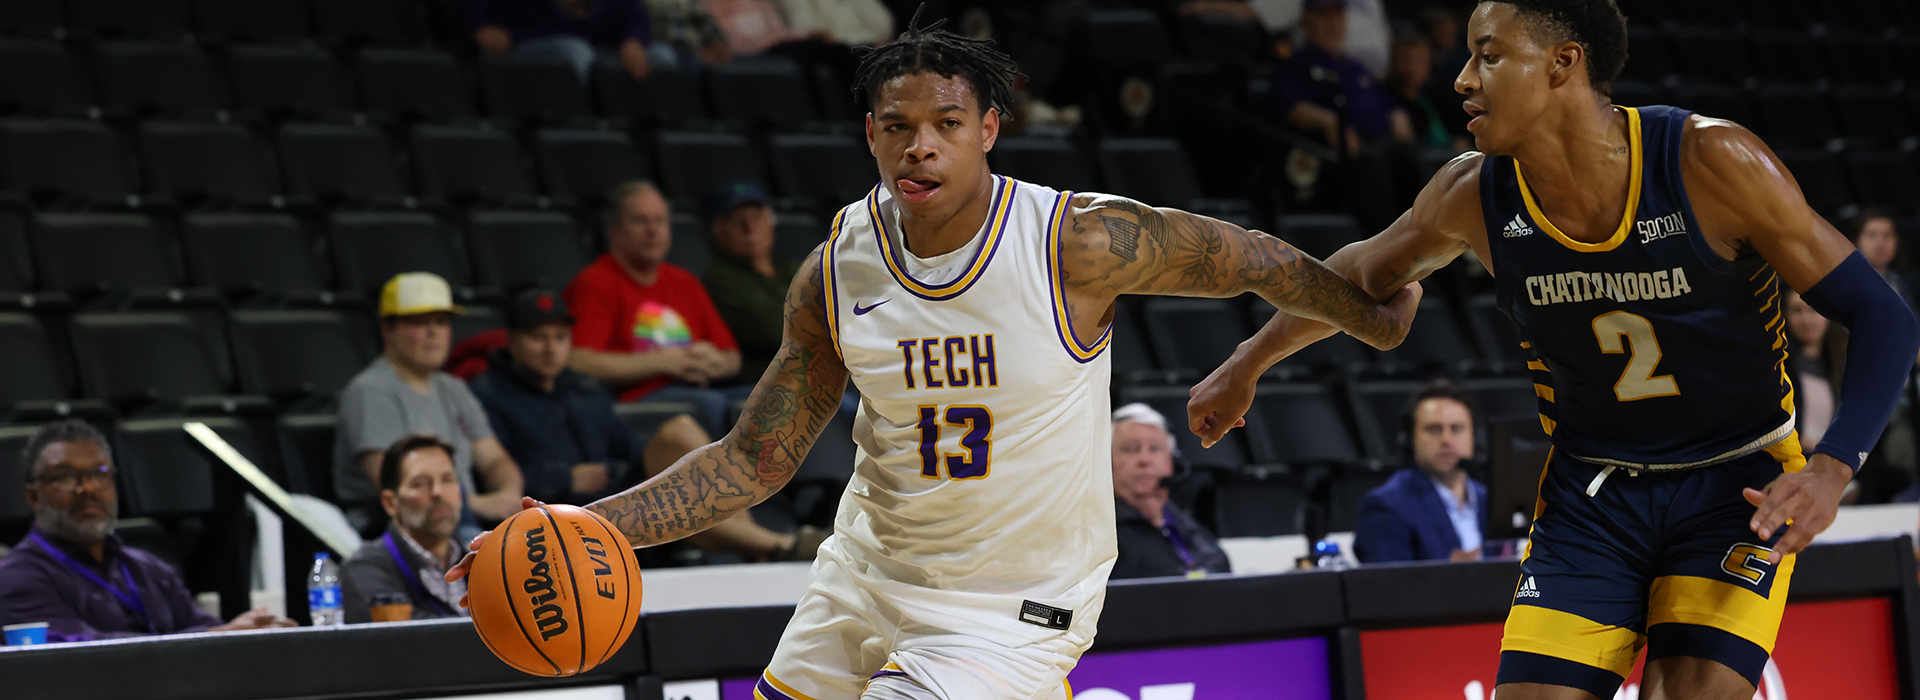 Tech falls to rival Chattanooga in in-state battle